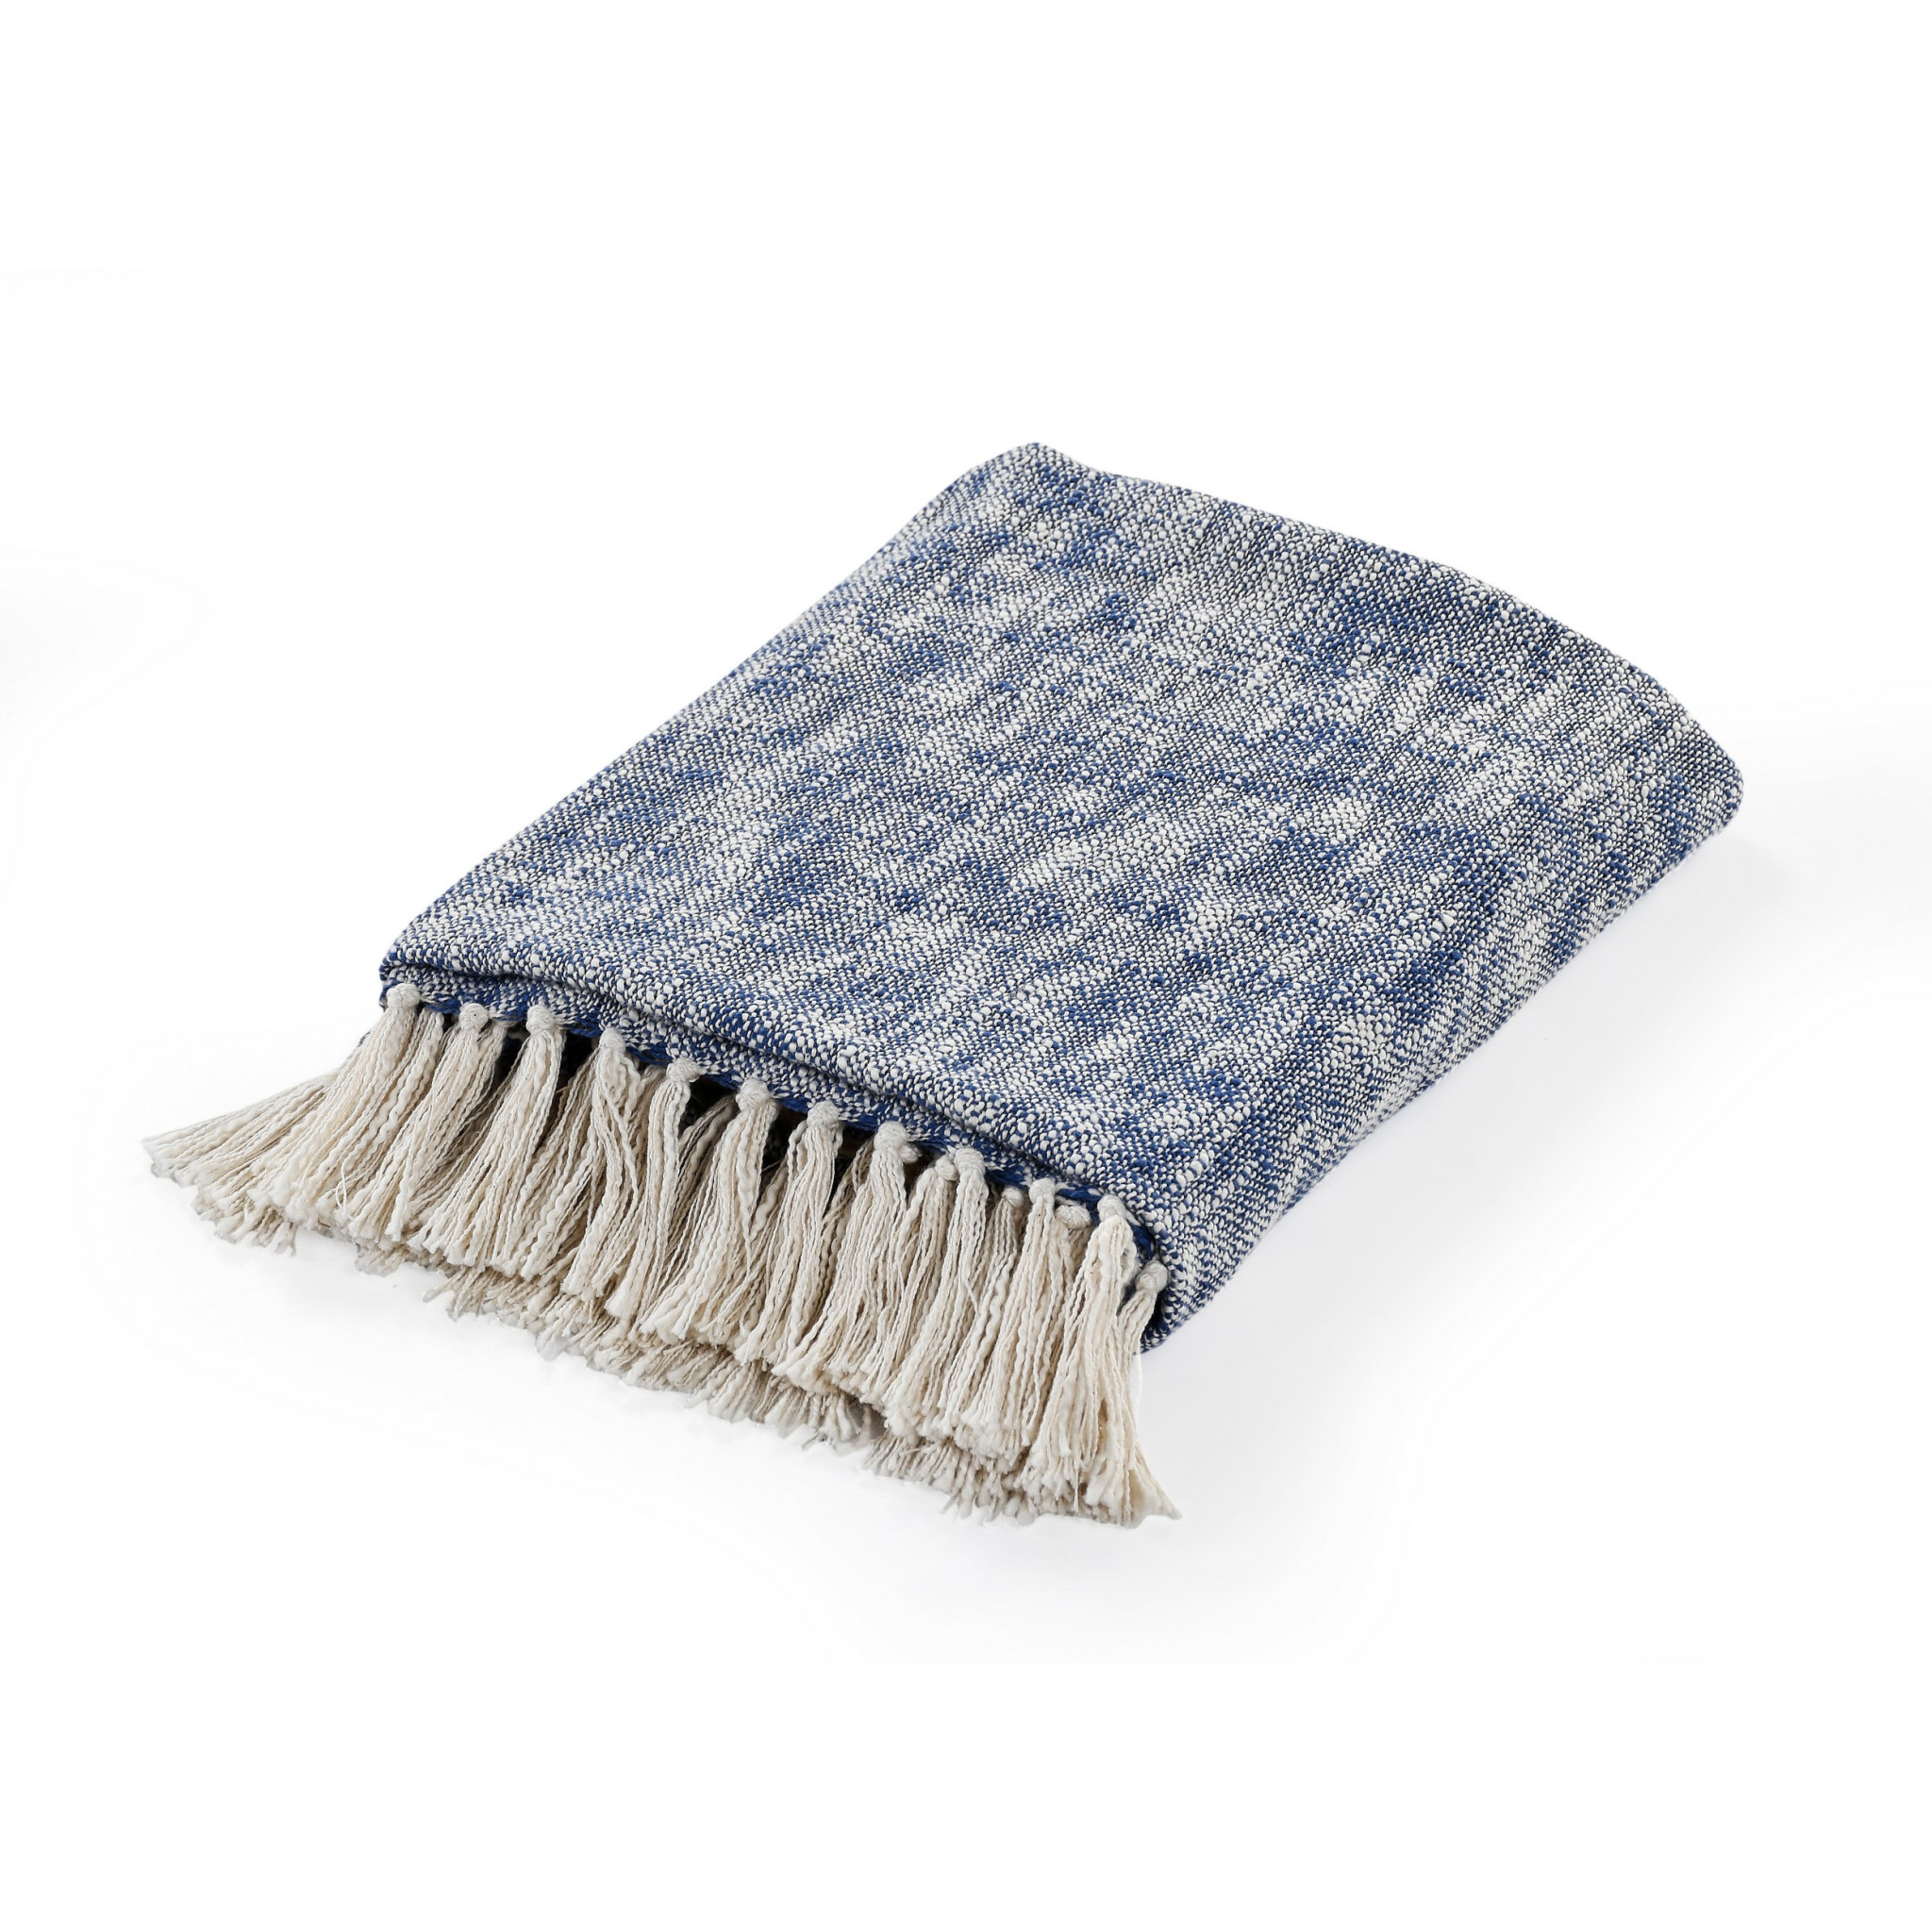 Blue and White Woven Cotton Solid Color Throw Blanket-516535-1